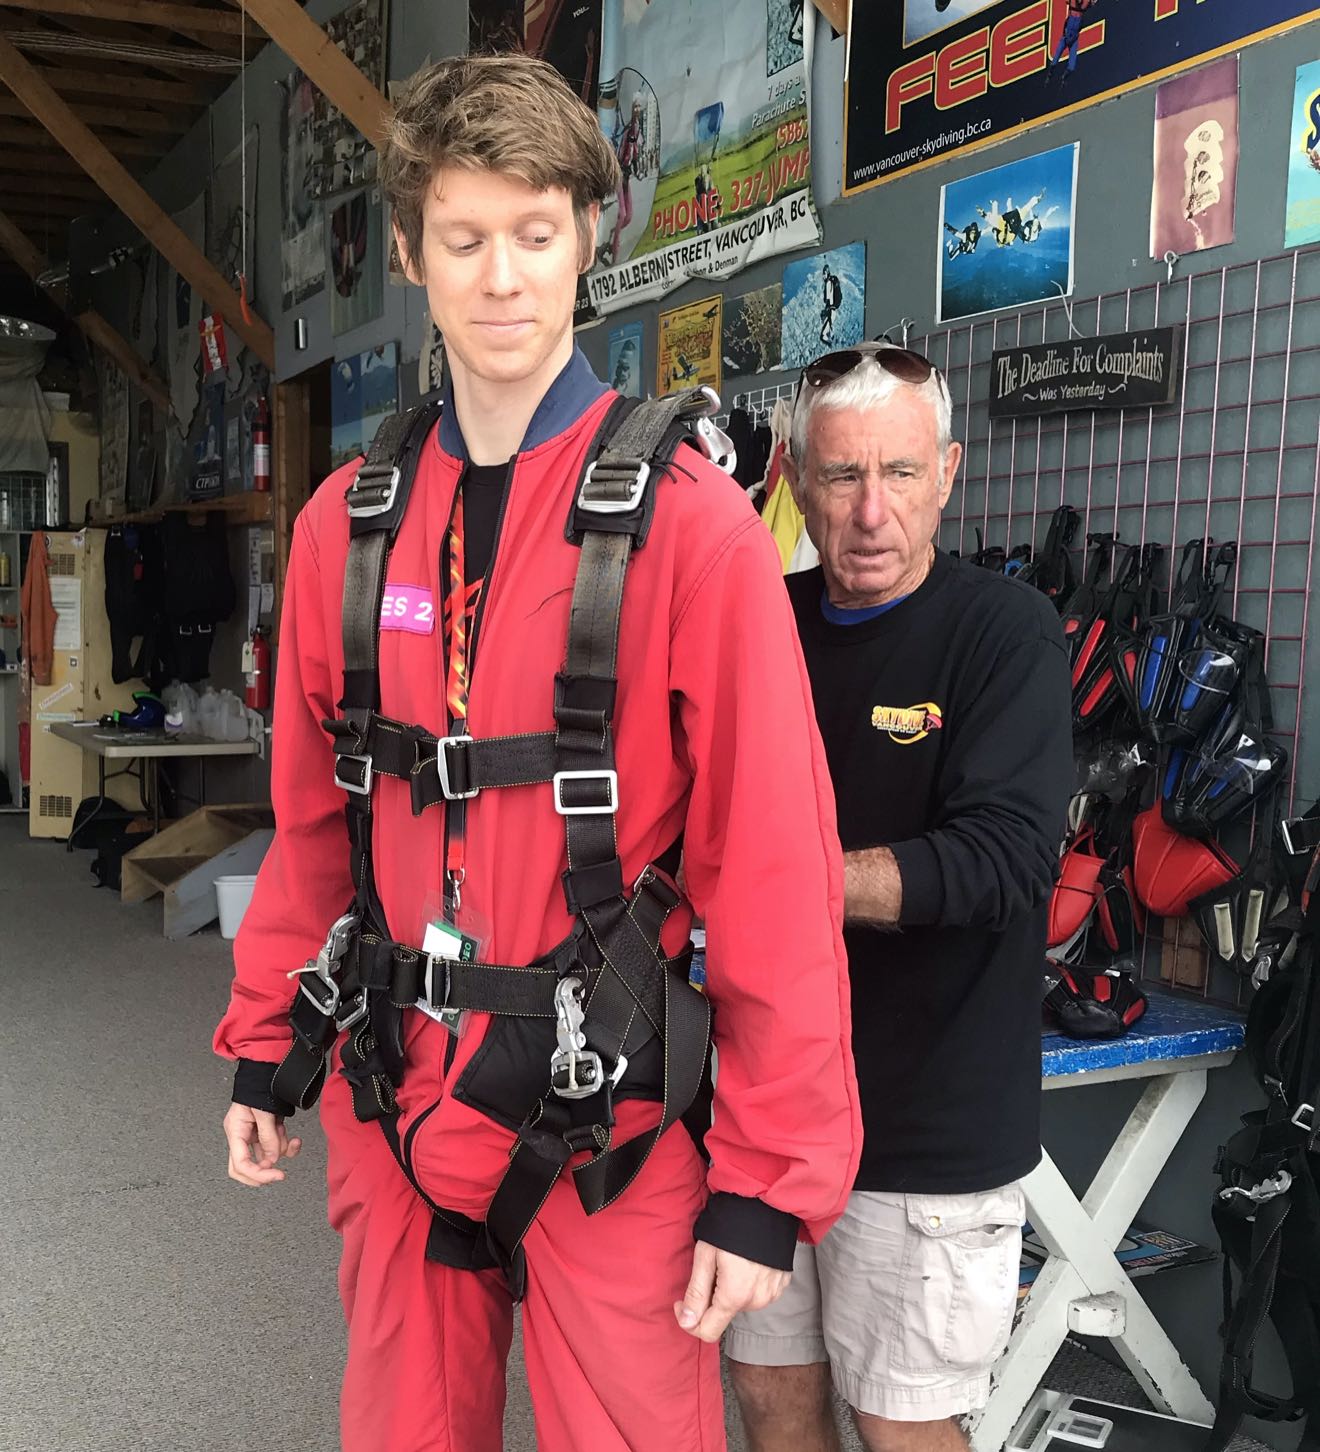 Skydiving suit up